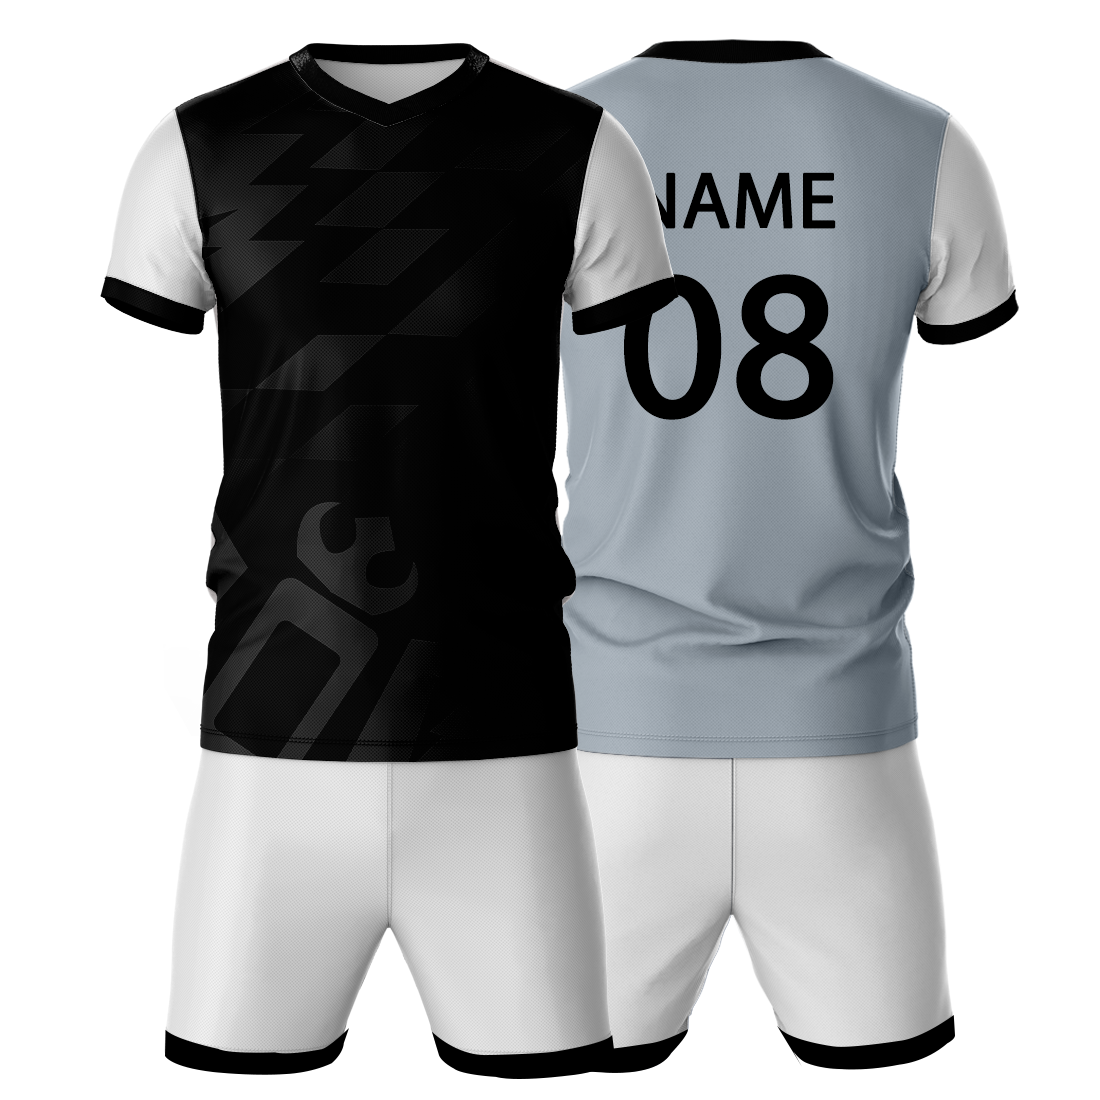 All Over Printed Jersey With Shorts Name & Number Printed.NP50000686